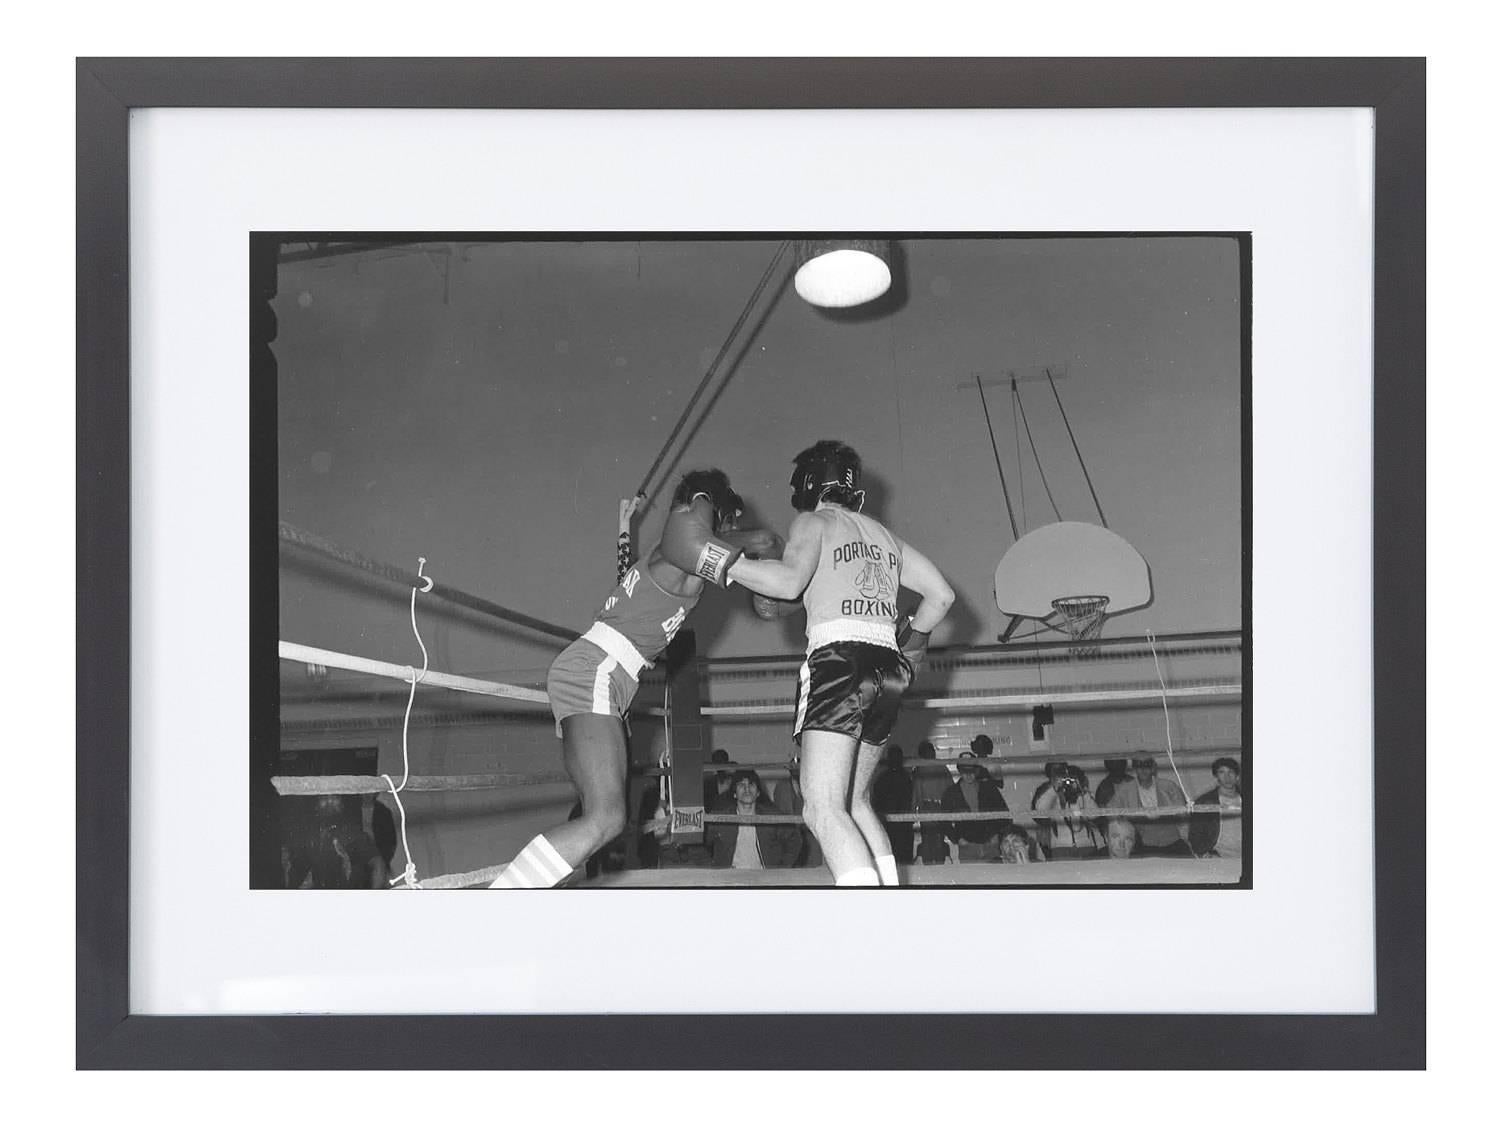 Chicago Vintage 1980s Boxing Photos - Photograph by Phil Mascione